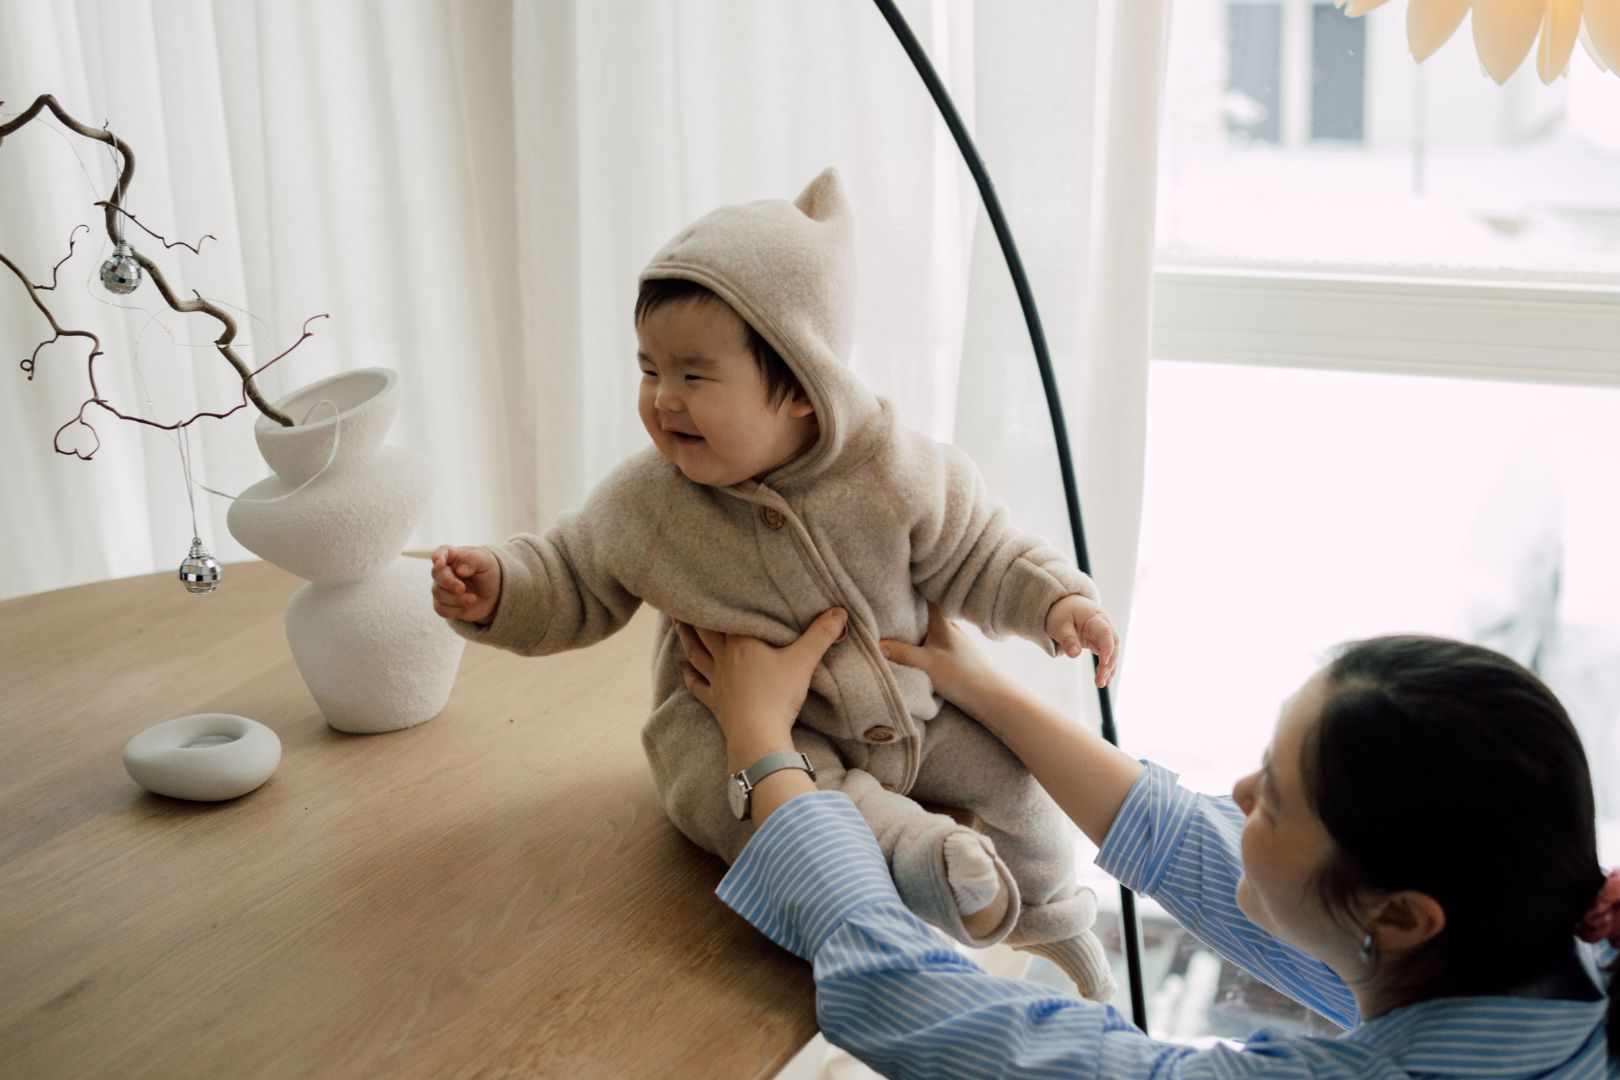 Merino Wool Baby Clothes: Why They're Best for Sleeping, Play and